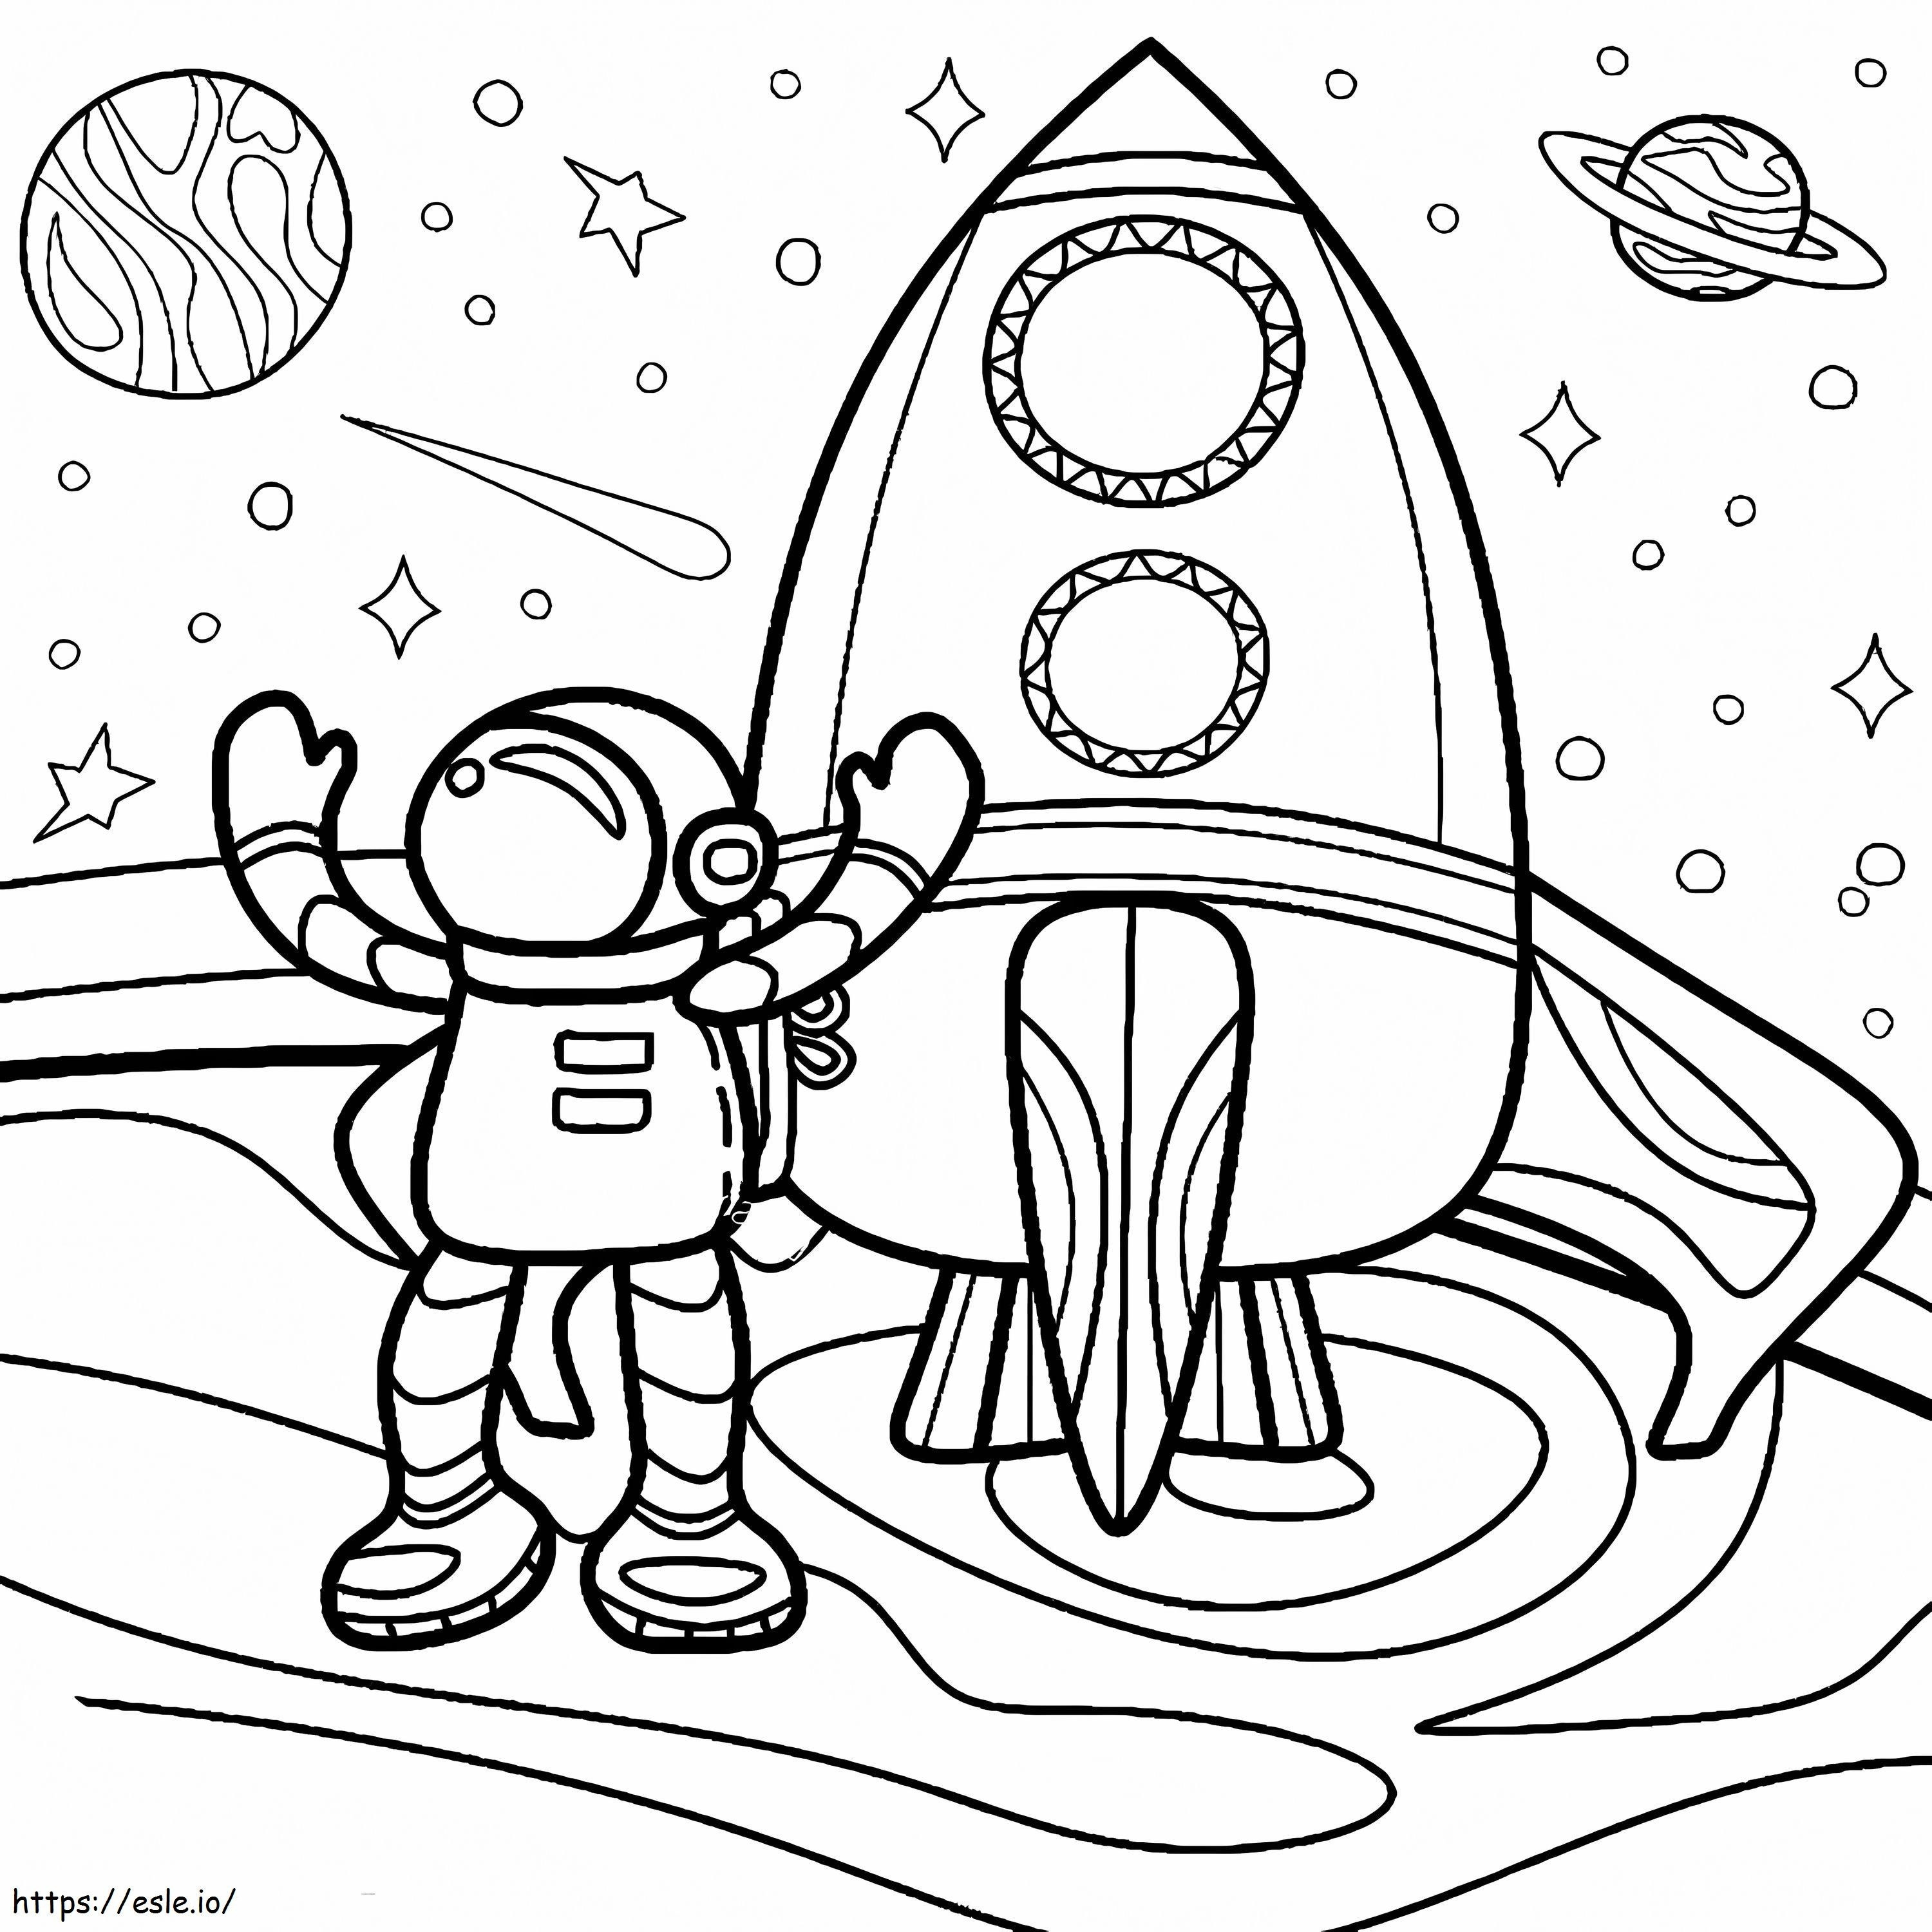 Cartoon Astronaut With Rocket coloring page